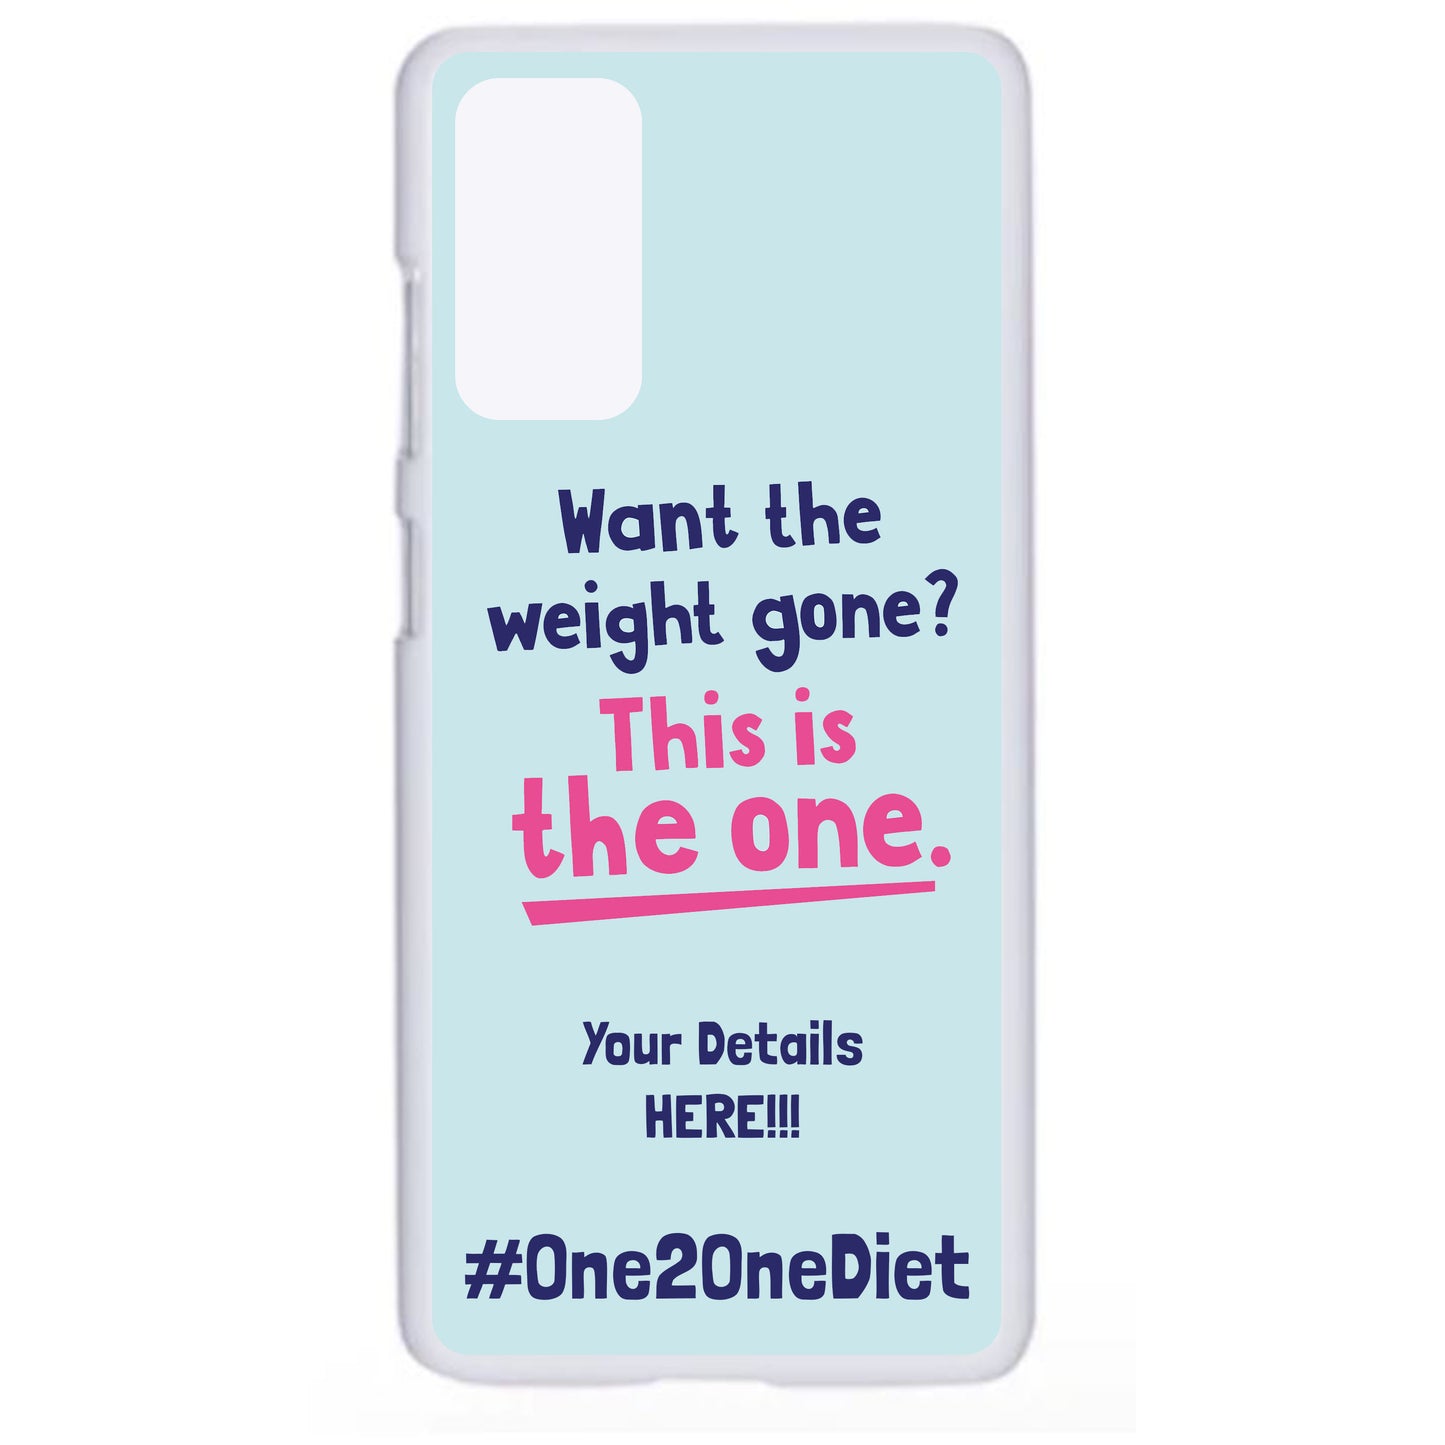 The 1:1 Diet - Huawei Phone Case